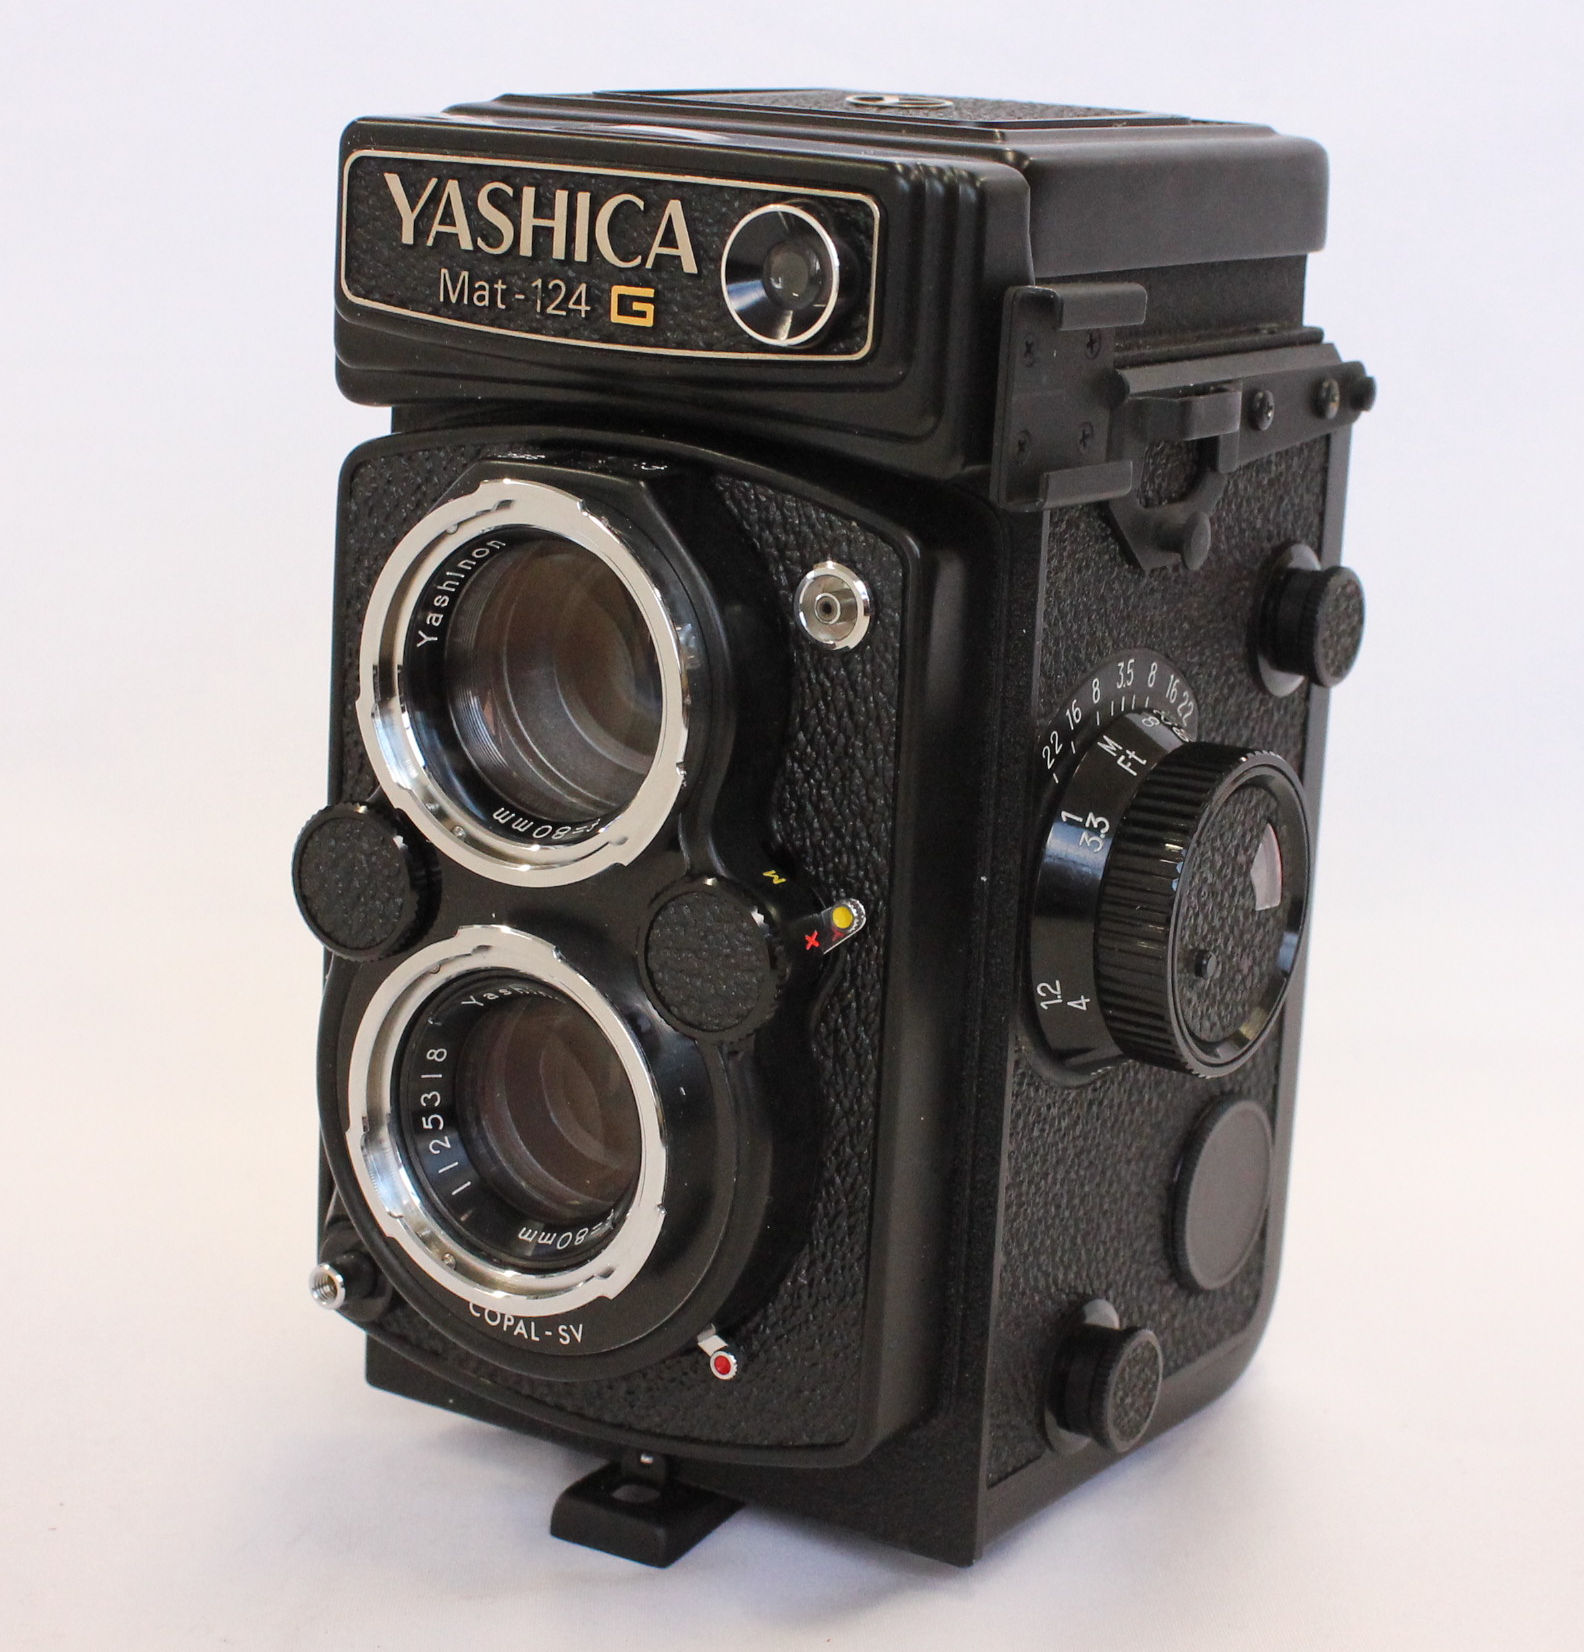  YASHICA MAT 124 G 6x6 TLR Medium Format Camera with 80mm F/3.5 Lens from Japan Photo 1